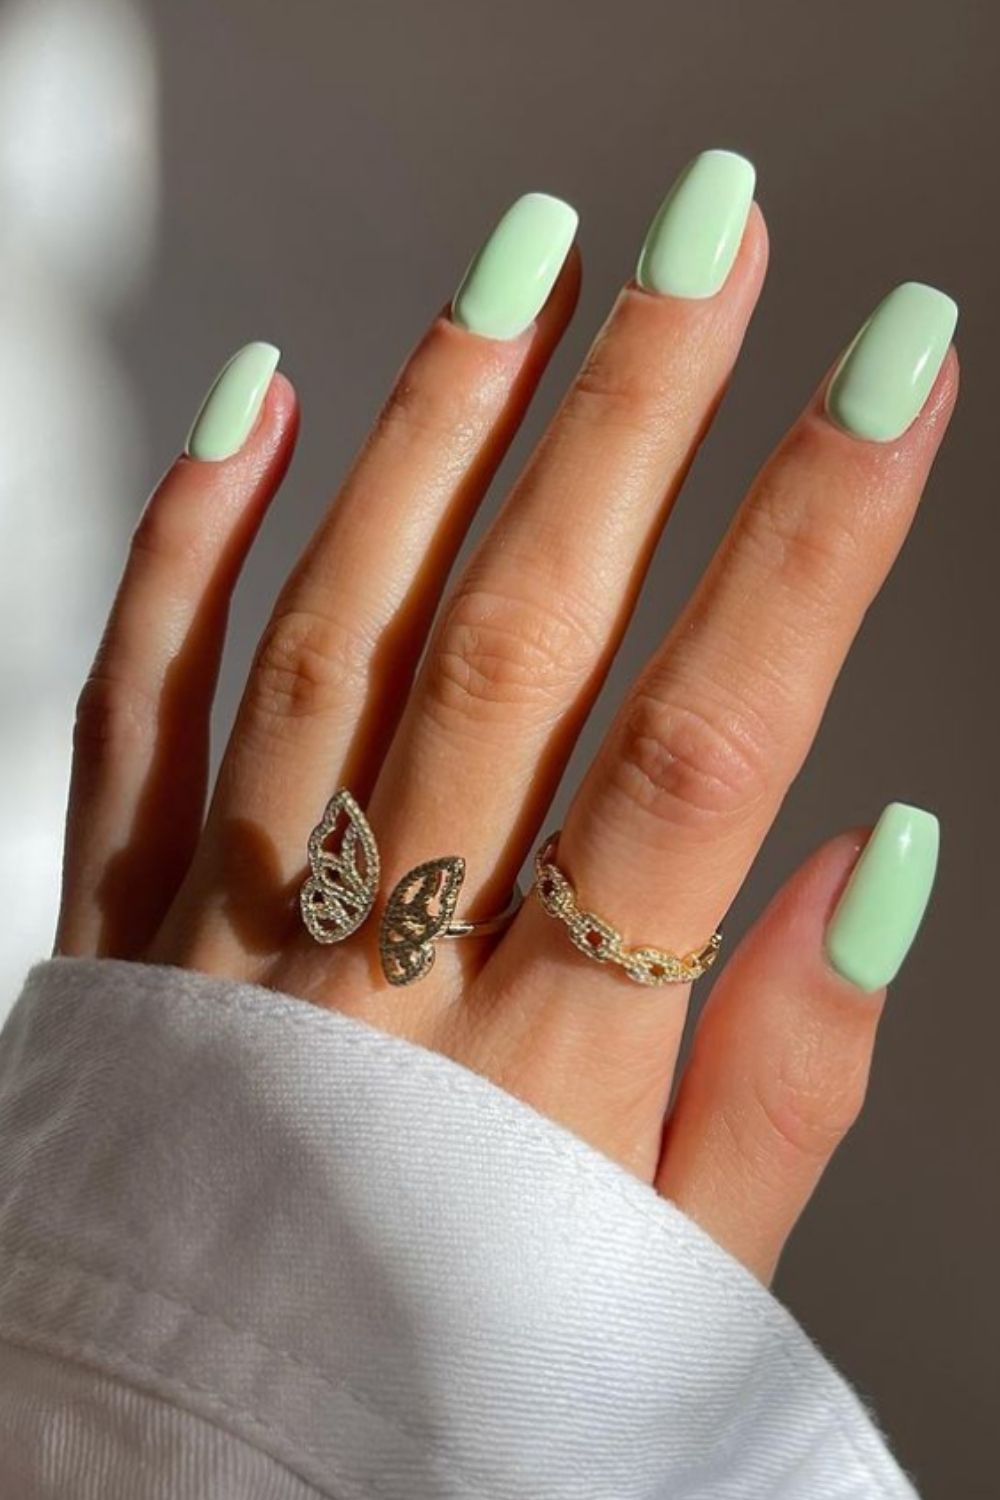 44 Natural short square nails designs 2021 You&#039;ll love in Summer!